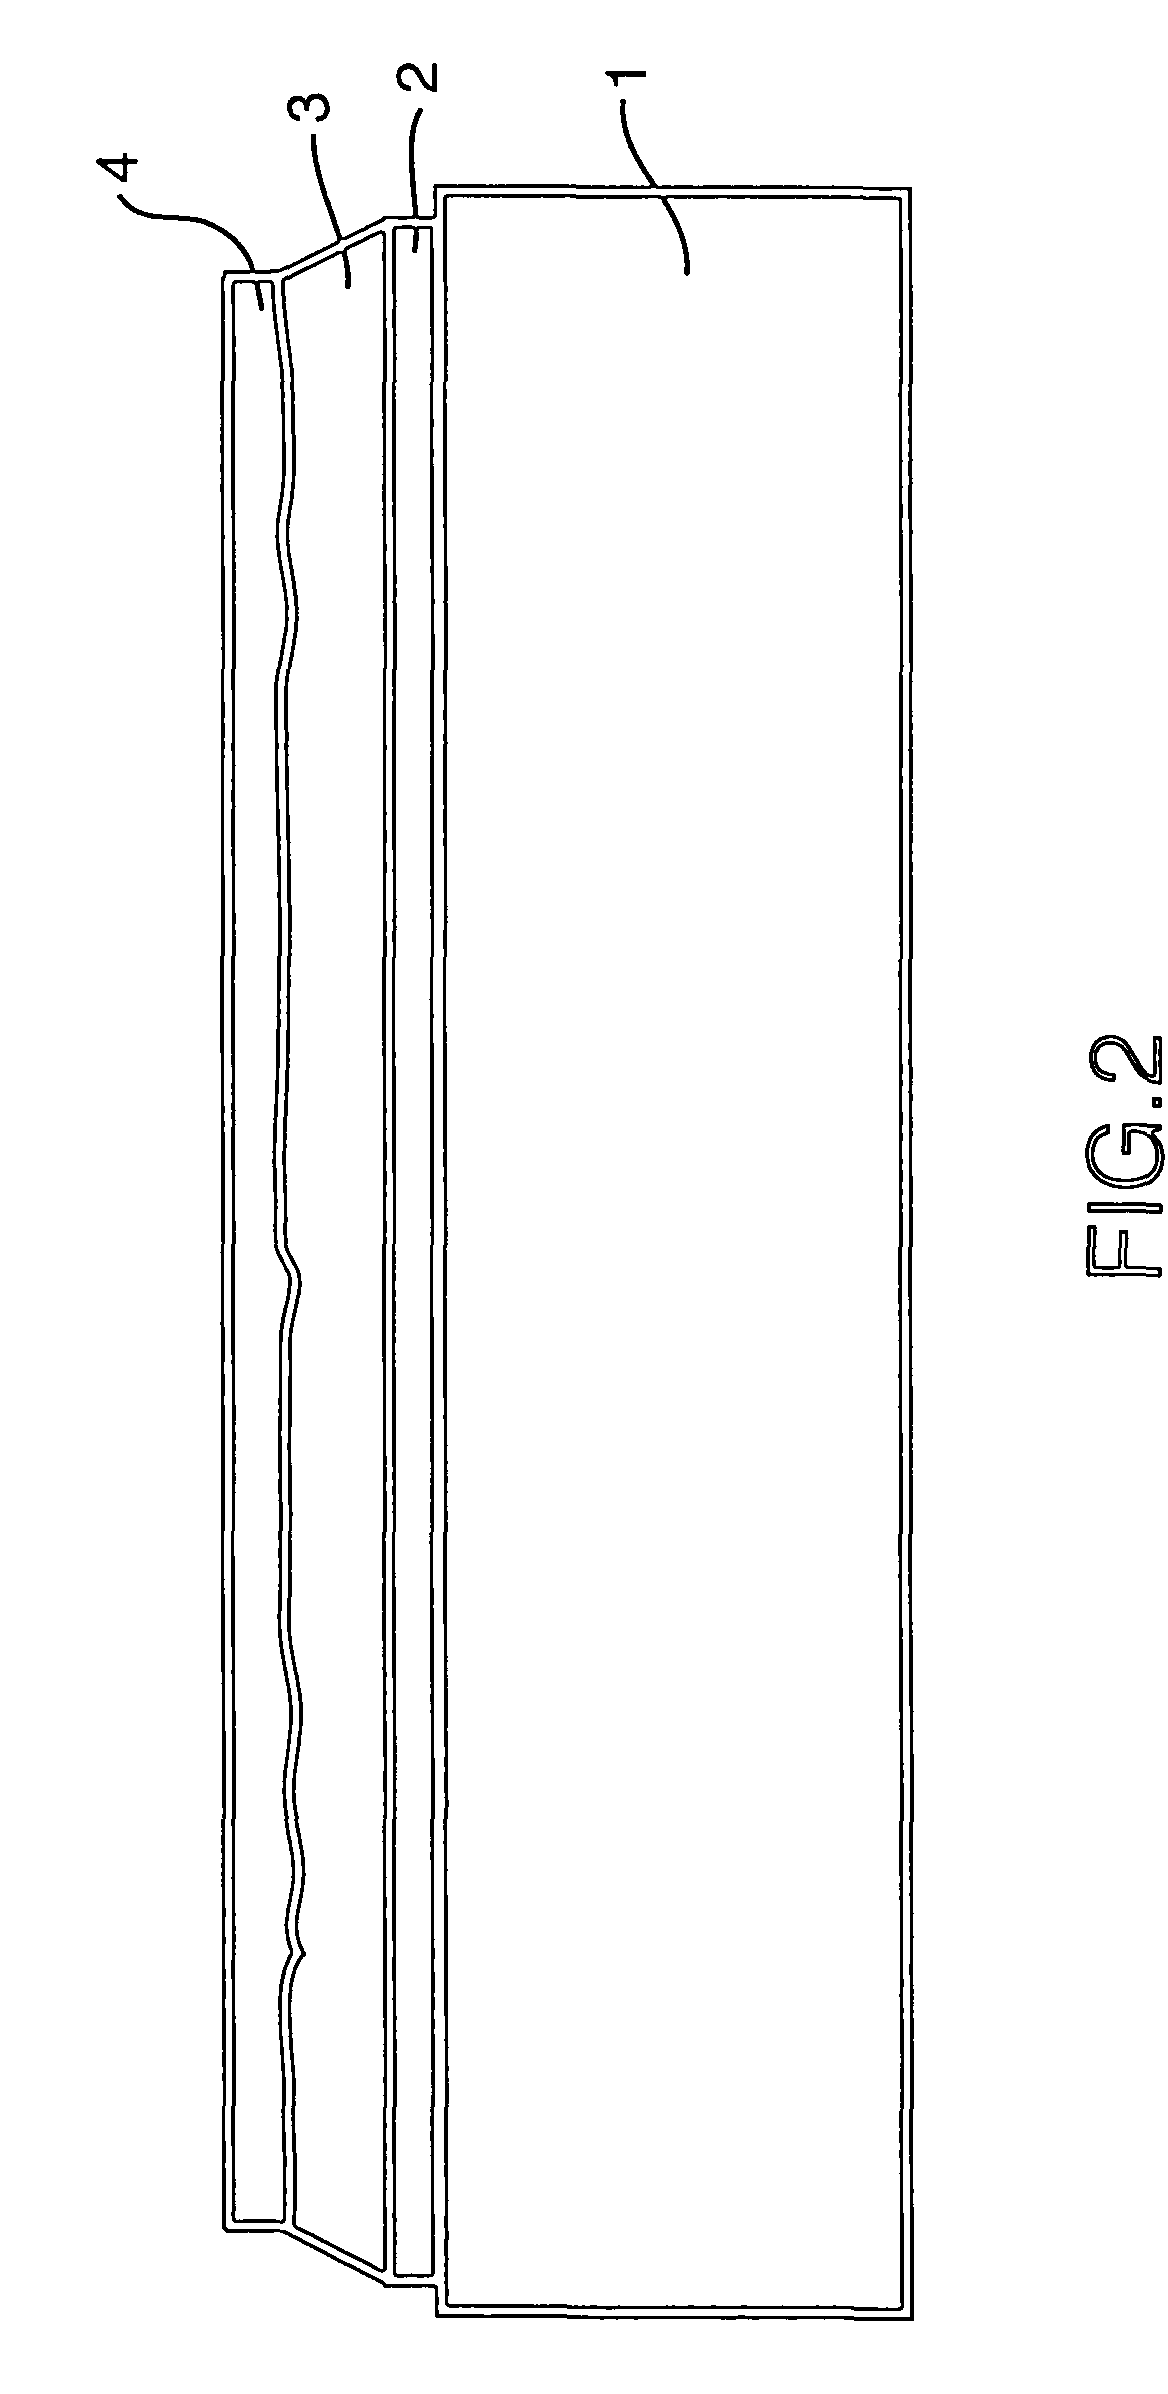 Thick film dielectric structure for thick dielectric electroluminescent displays